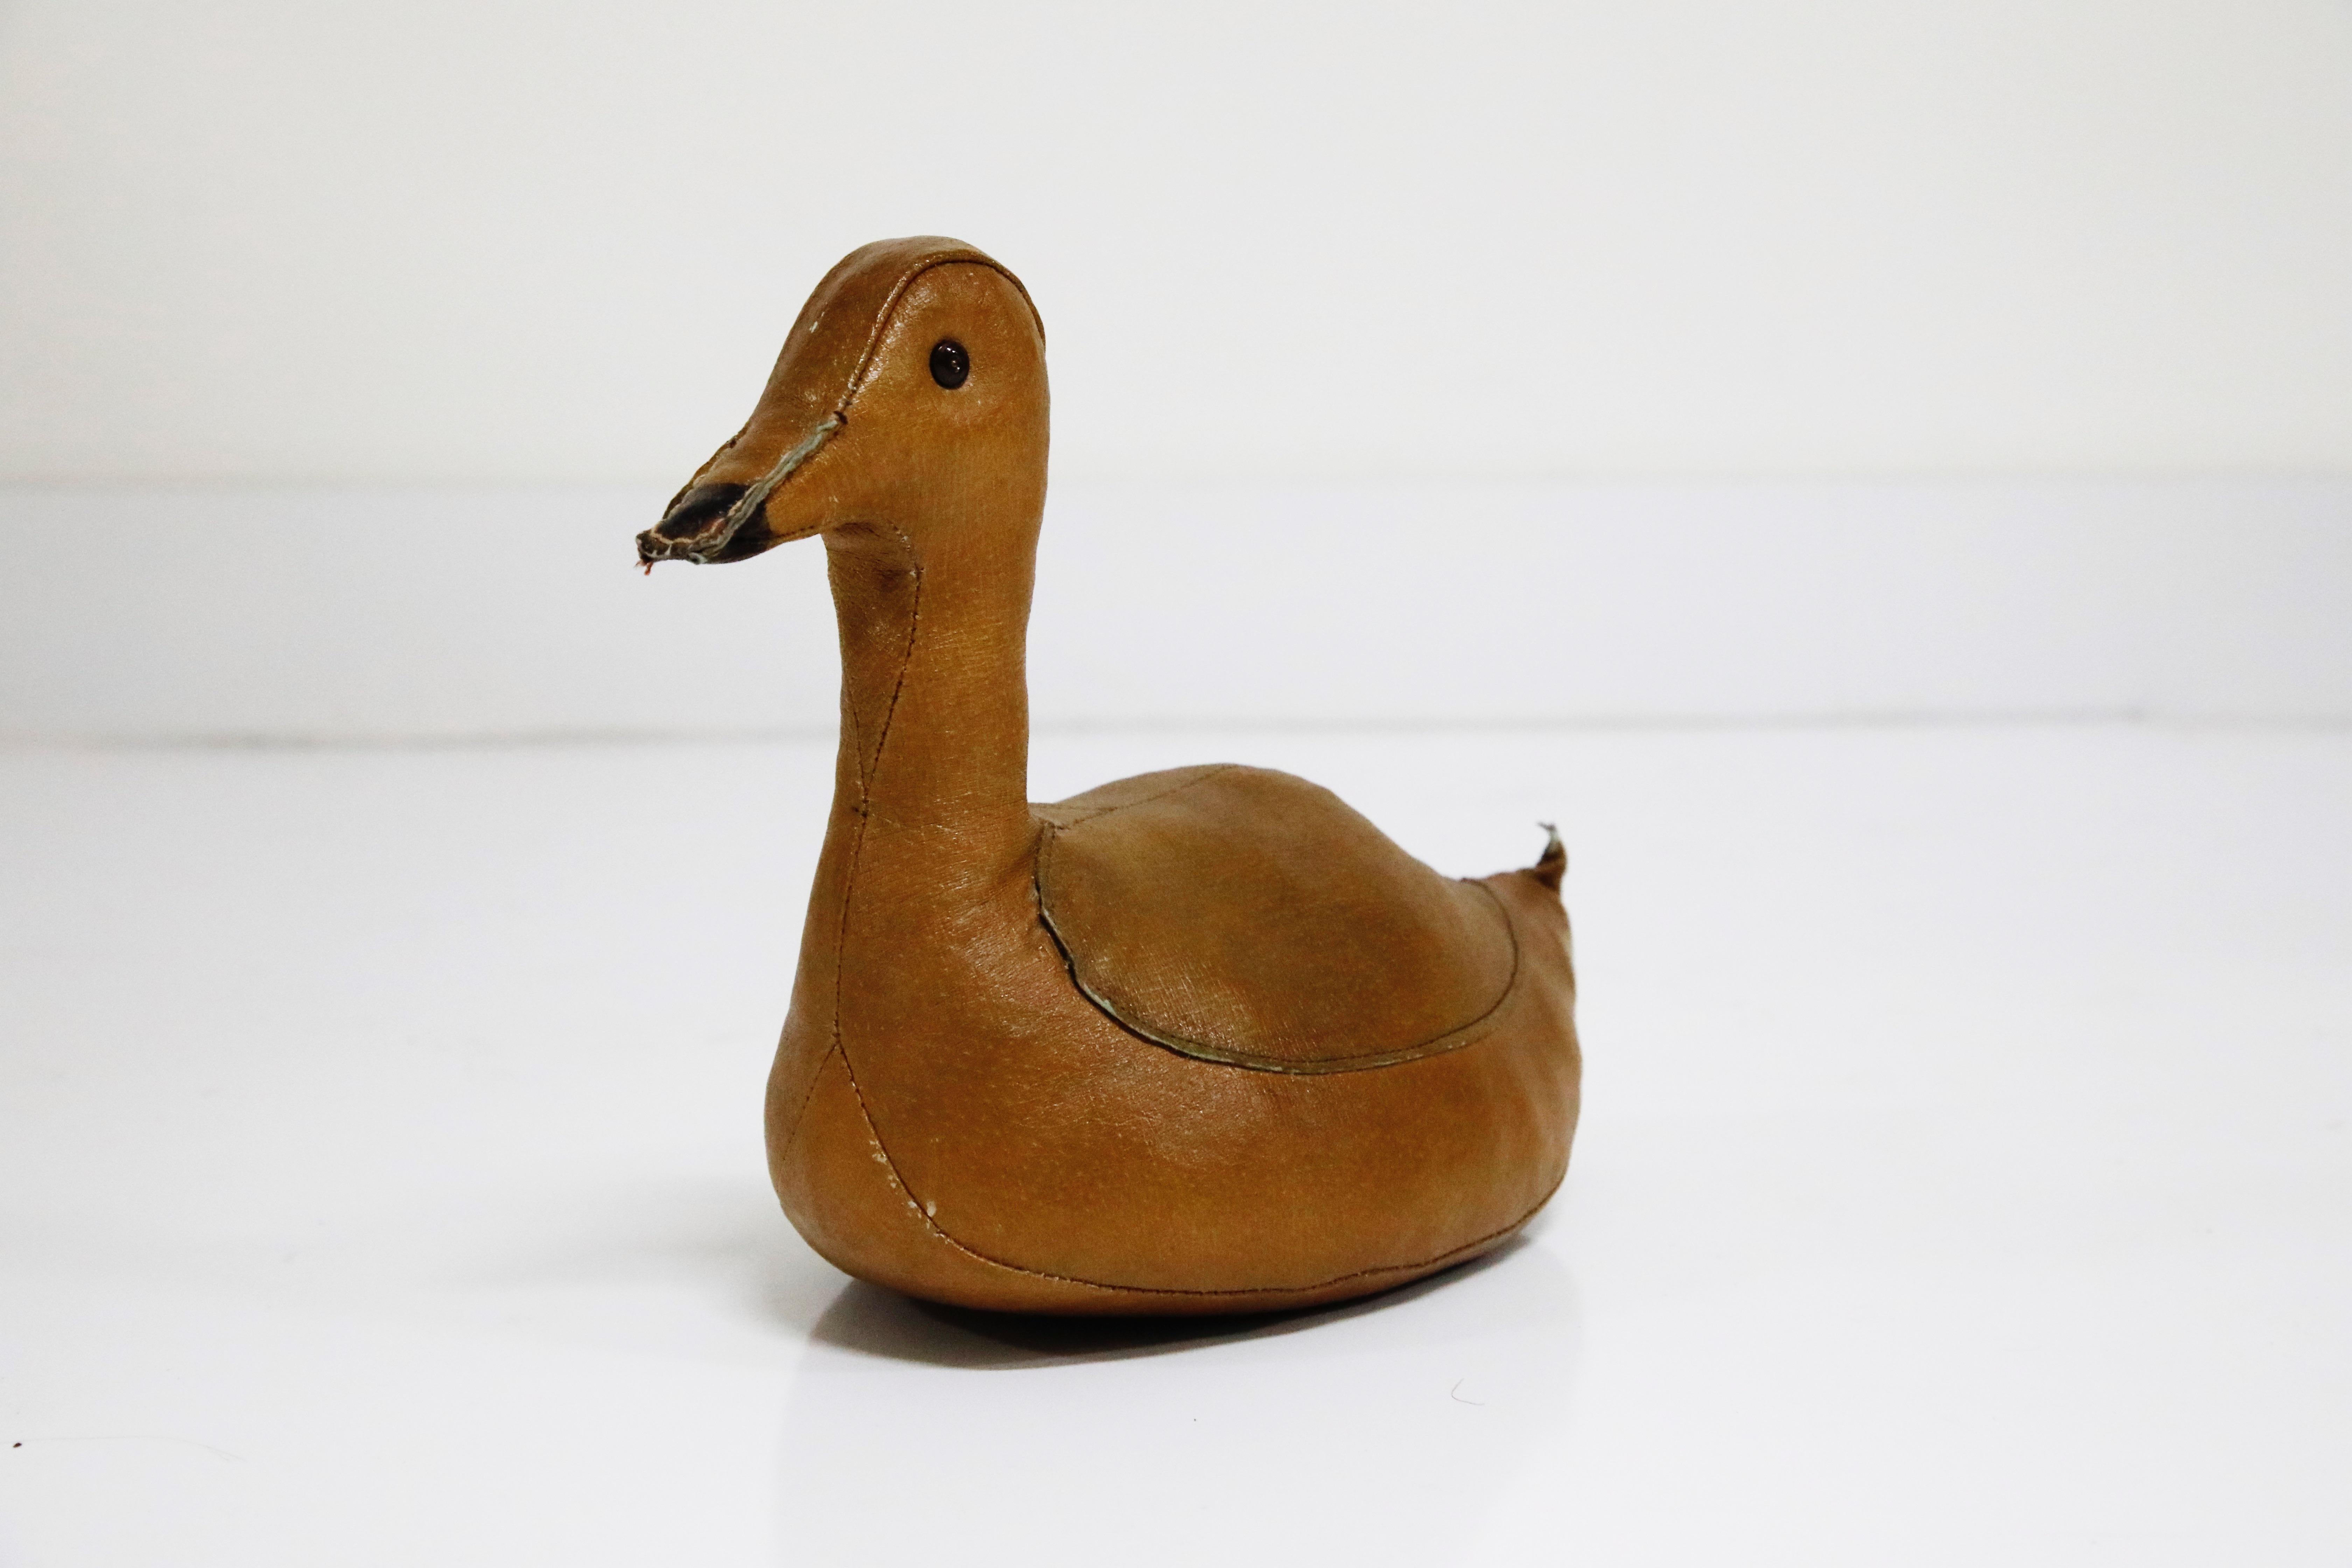 Mid-Century Modern Leather Duckie Doorstop by Dimitri Omersa for Abercrombie and Fitch, 1950s